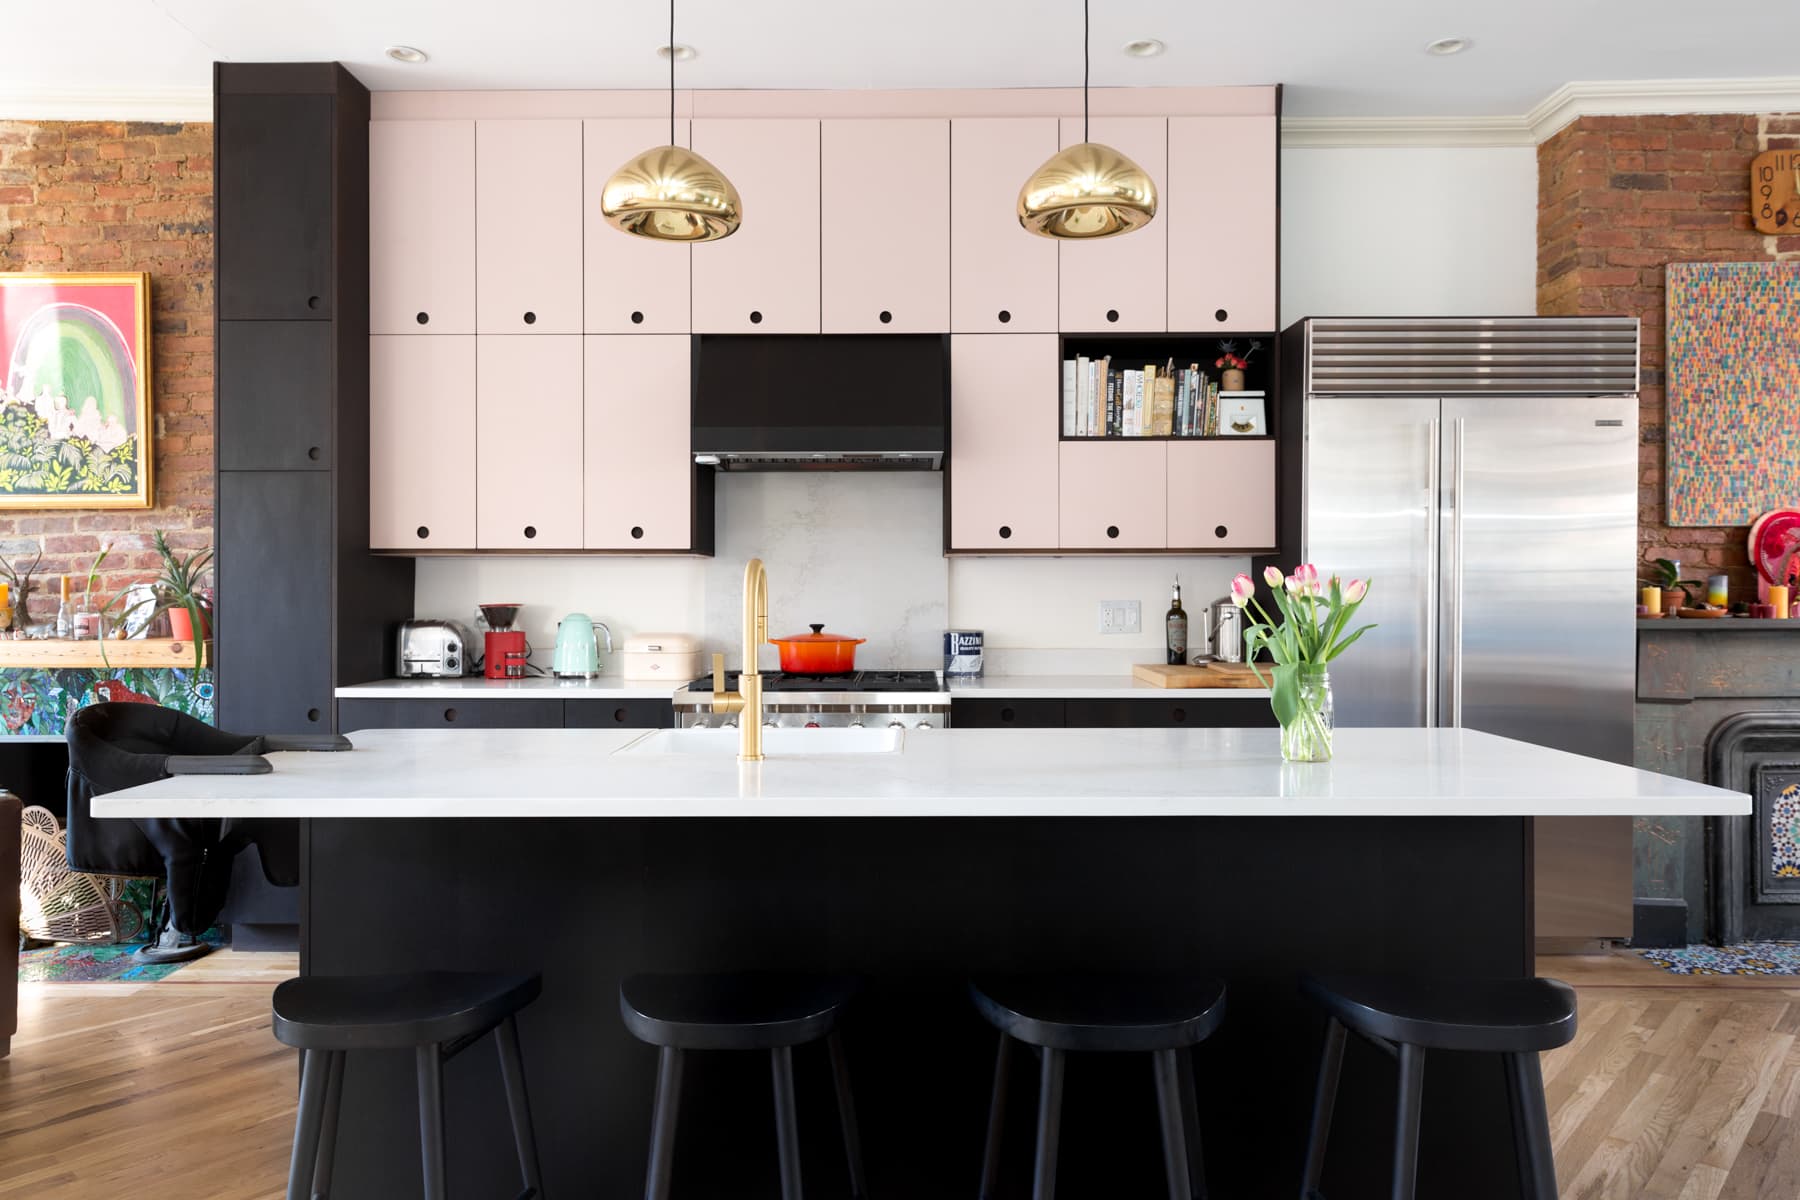 7 Low Cost Or Free Kitchen Staging Ideas Professionals Swear By Apartment Therapy